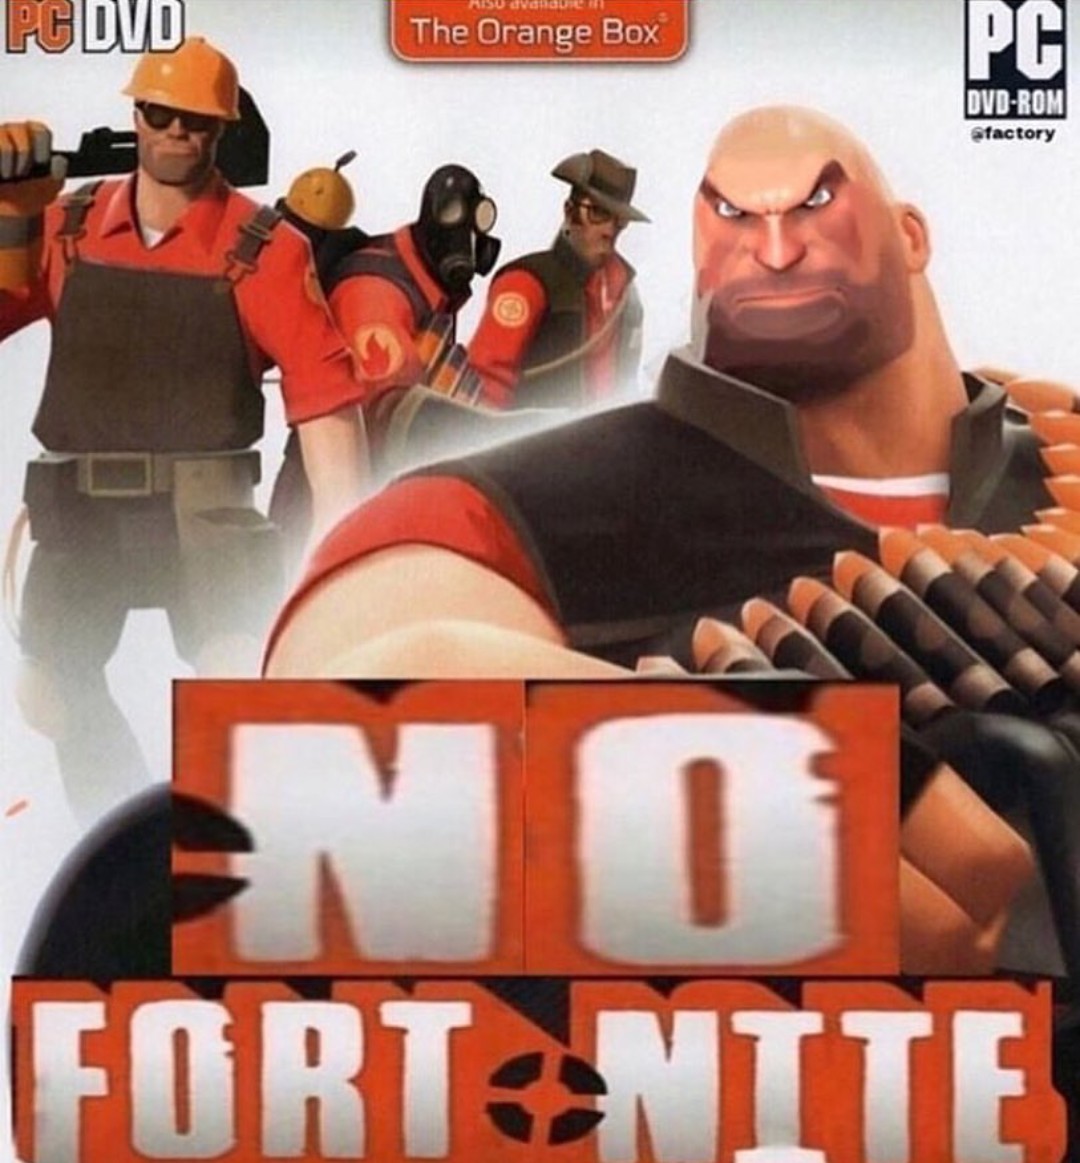 TF2 > any game released in the past three years - meme